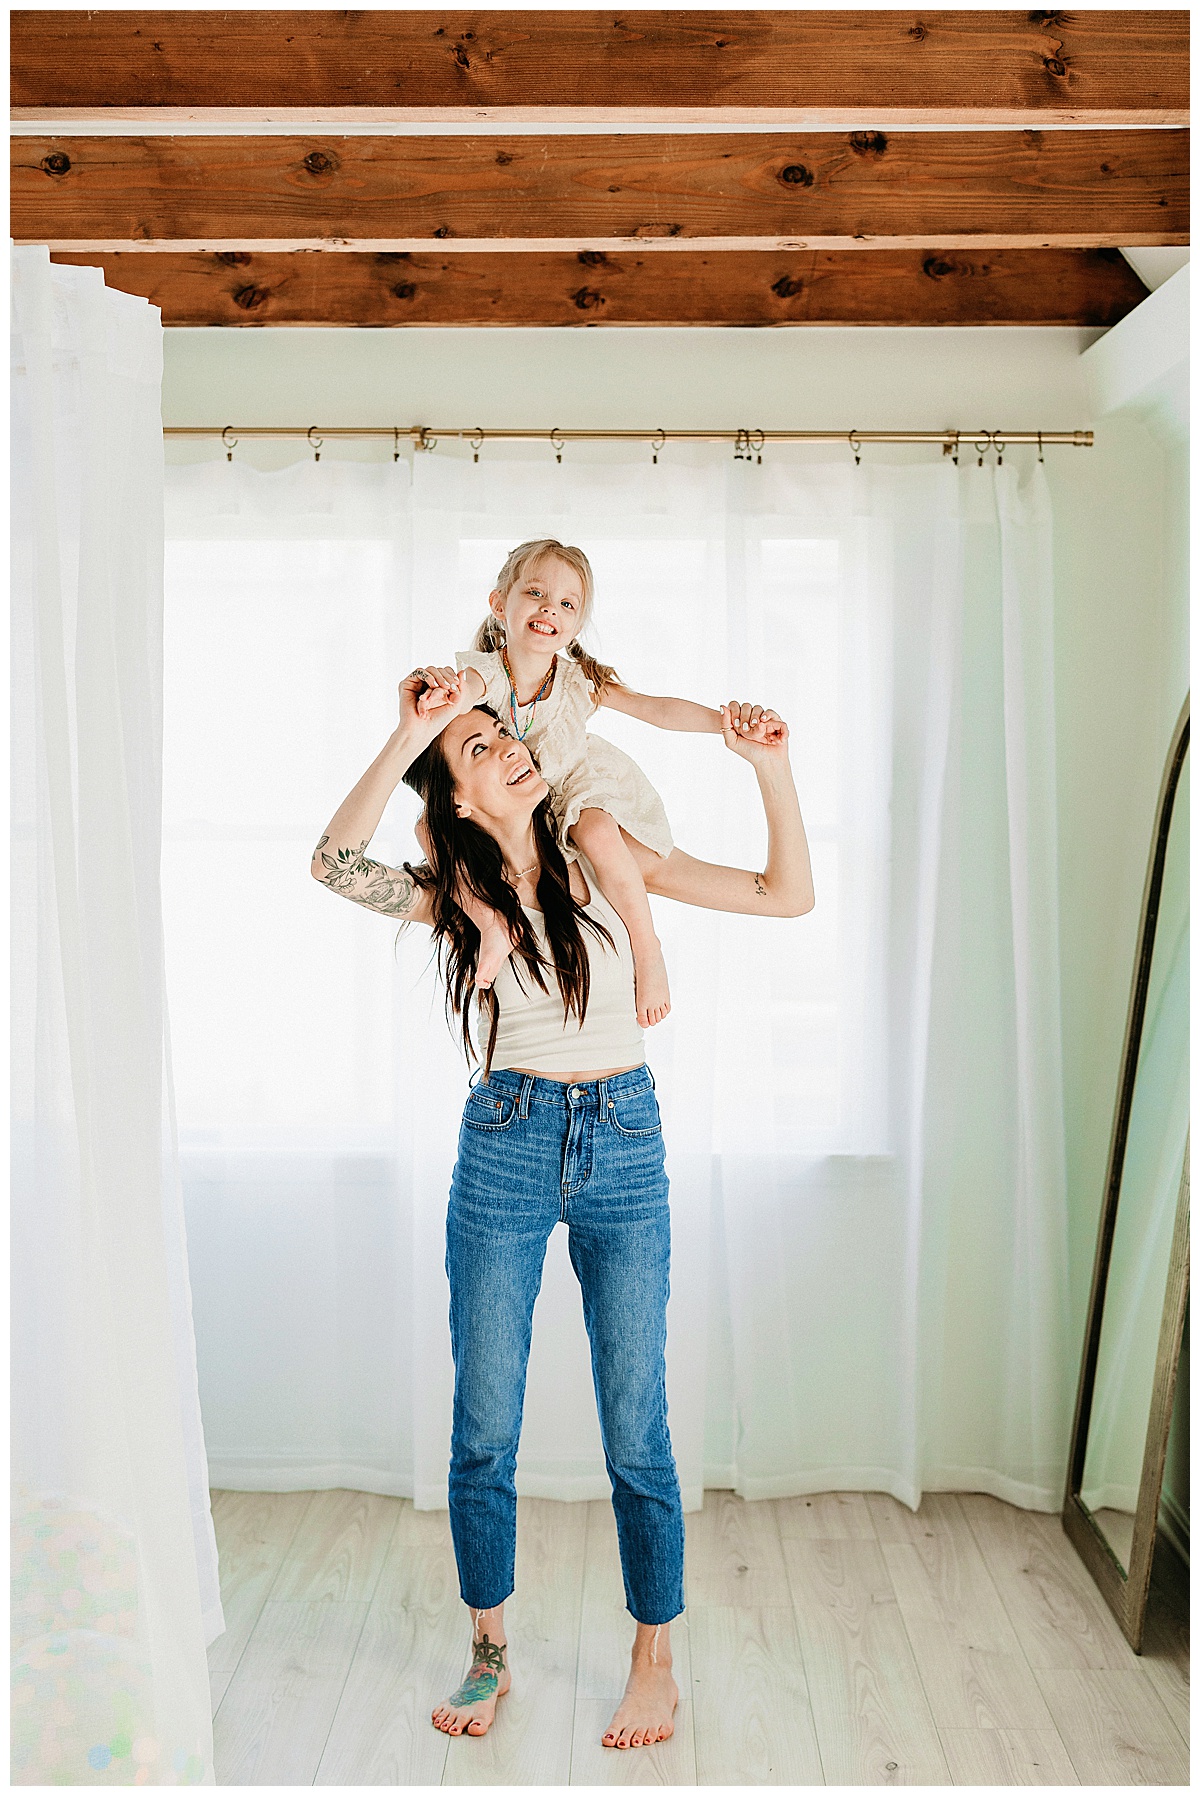 Little girl rides on Moms shoulders for Norma Fayak Photography